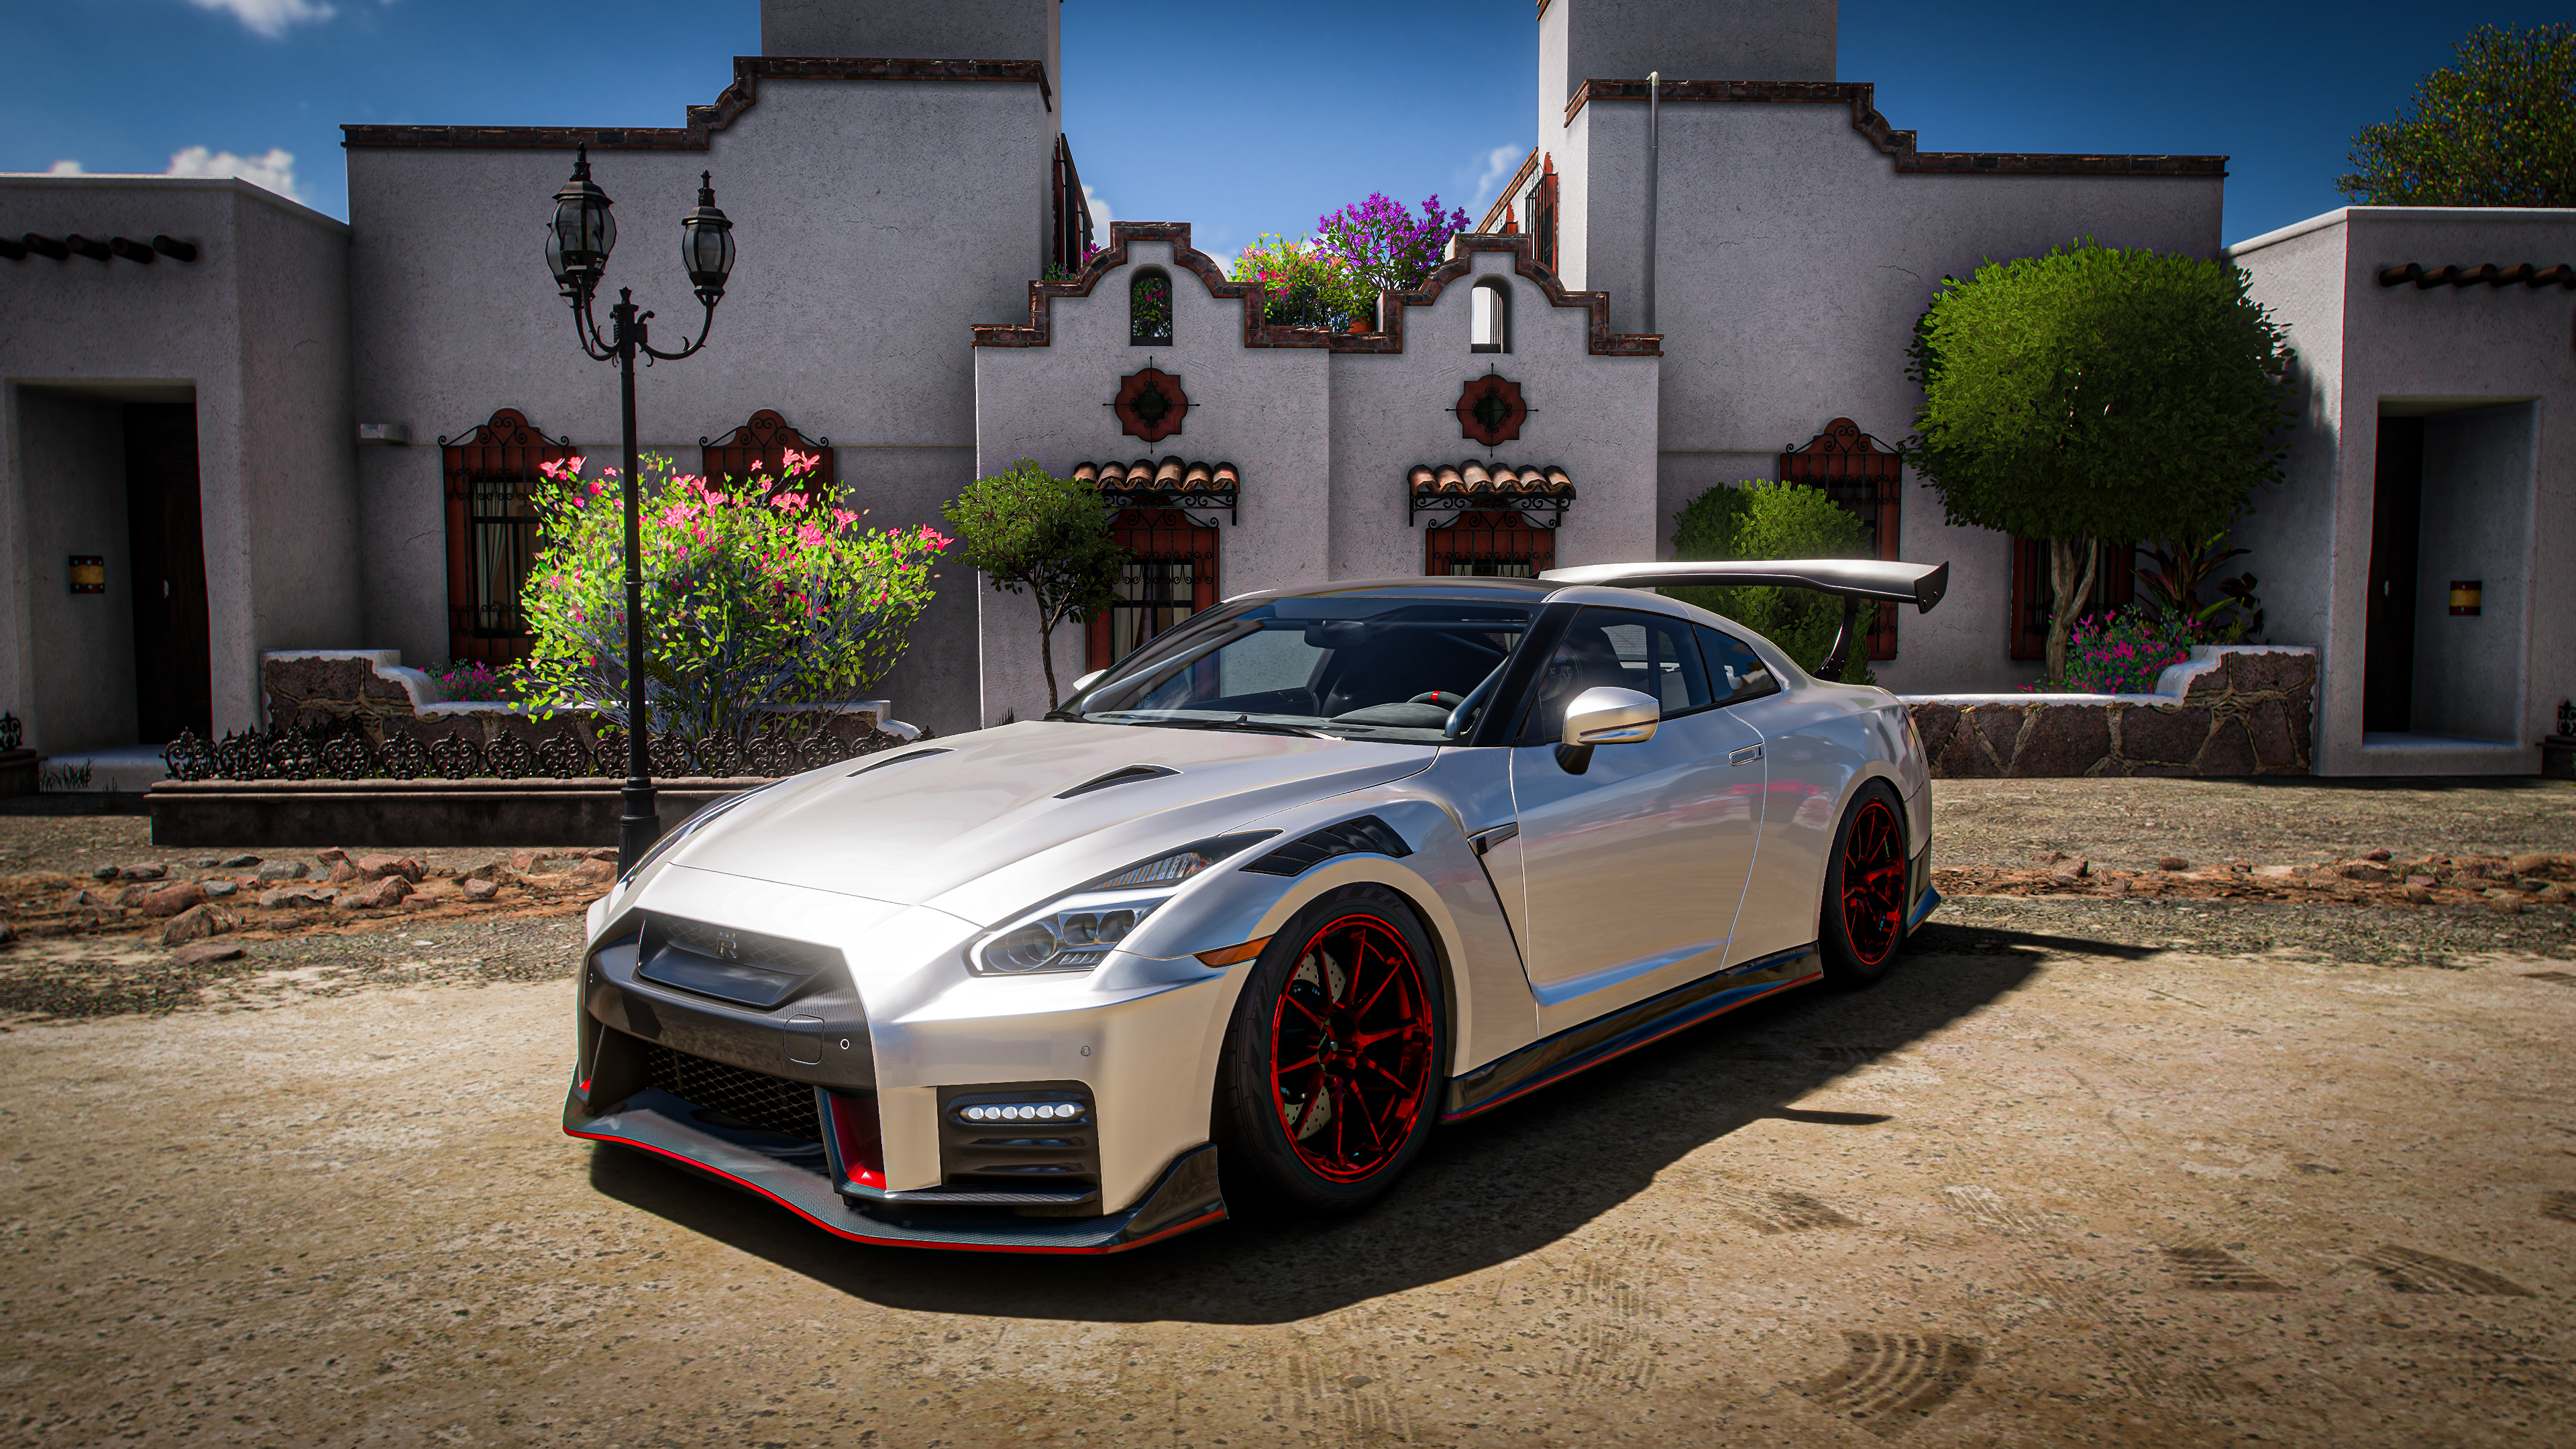 General 3840x2160 Forza Horizon 5 Forza Horizon Forza Nissan Nissan GT-R Nissan GT-R NISMO video games car vehicle CGI frontal view building flowers